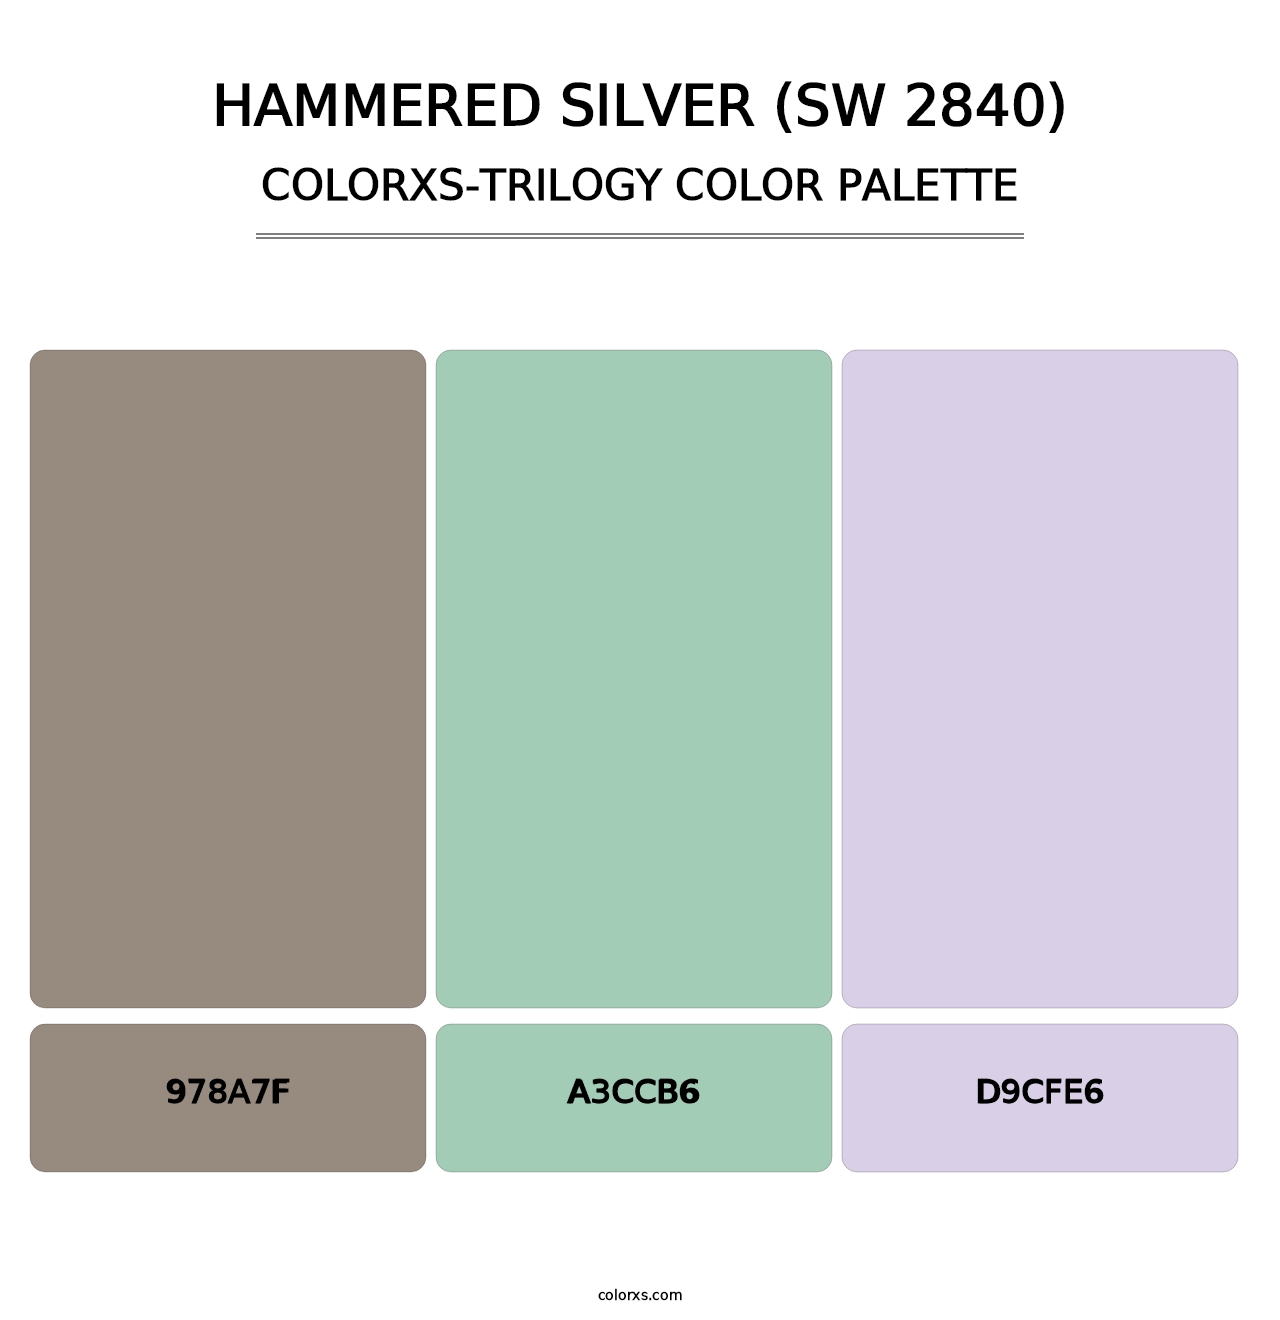 Hammered Silver (SW 2840) - Colorxs Trilogy Palette